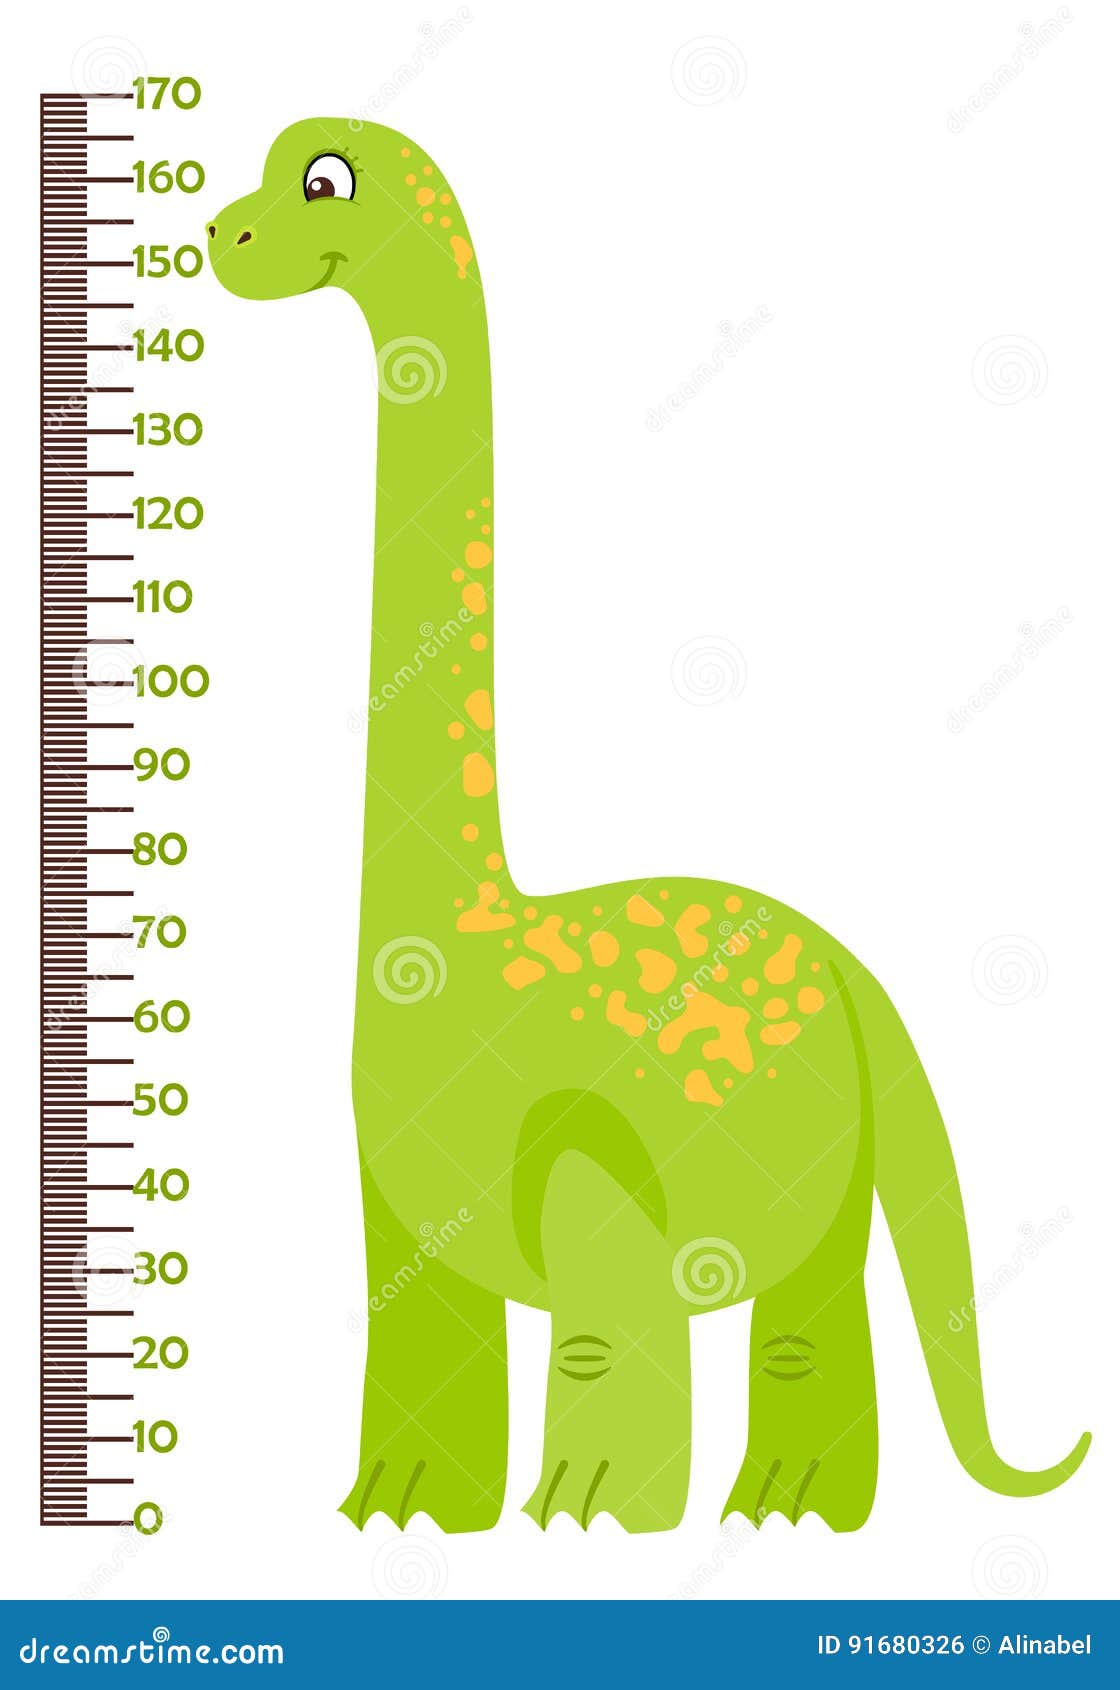 Height Chart Download